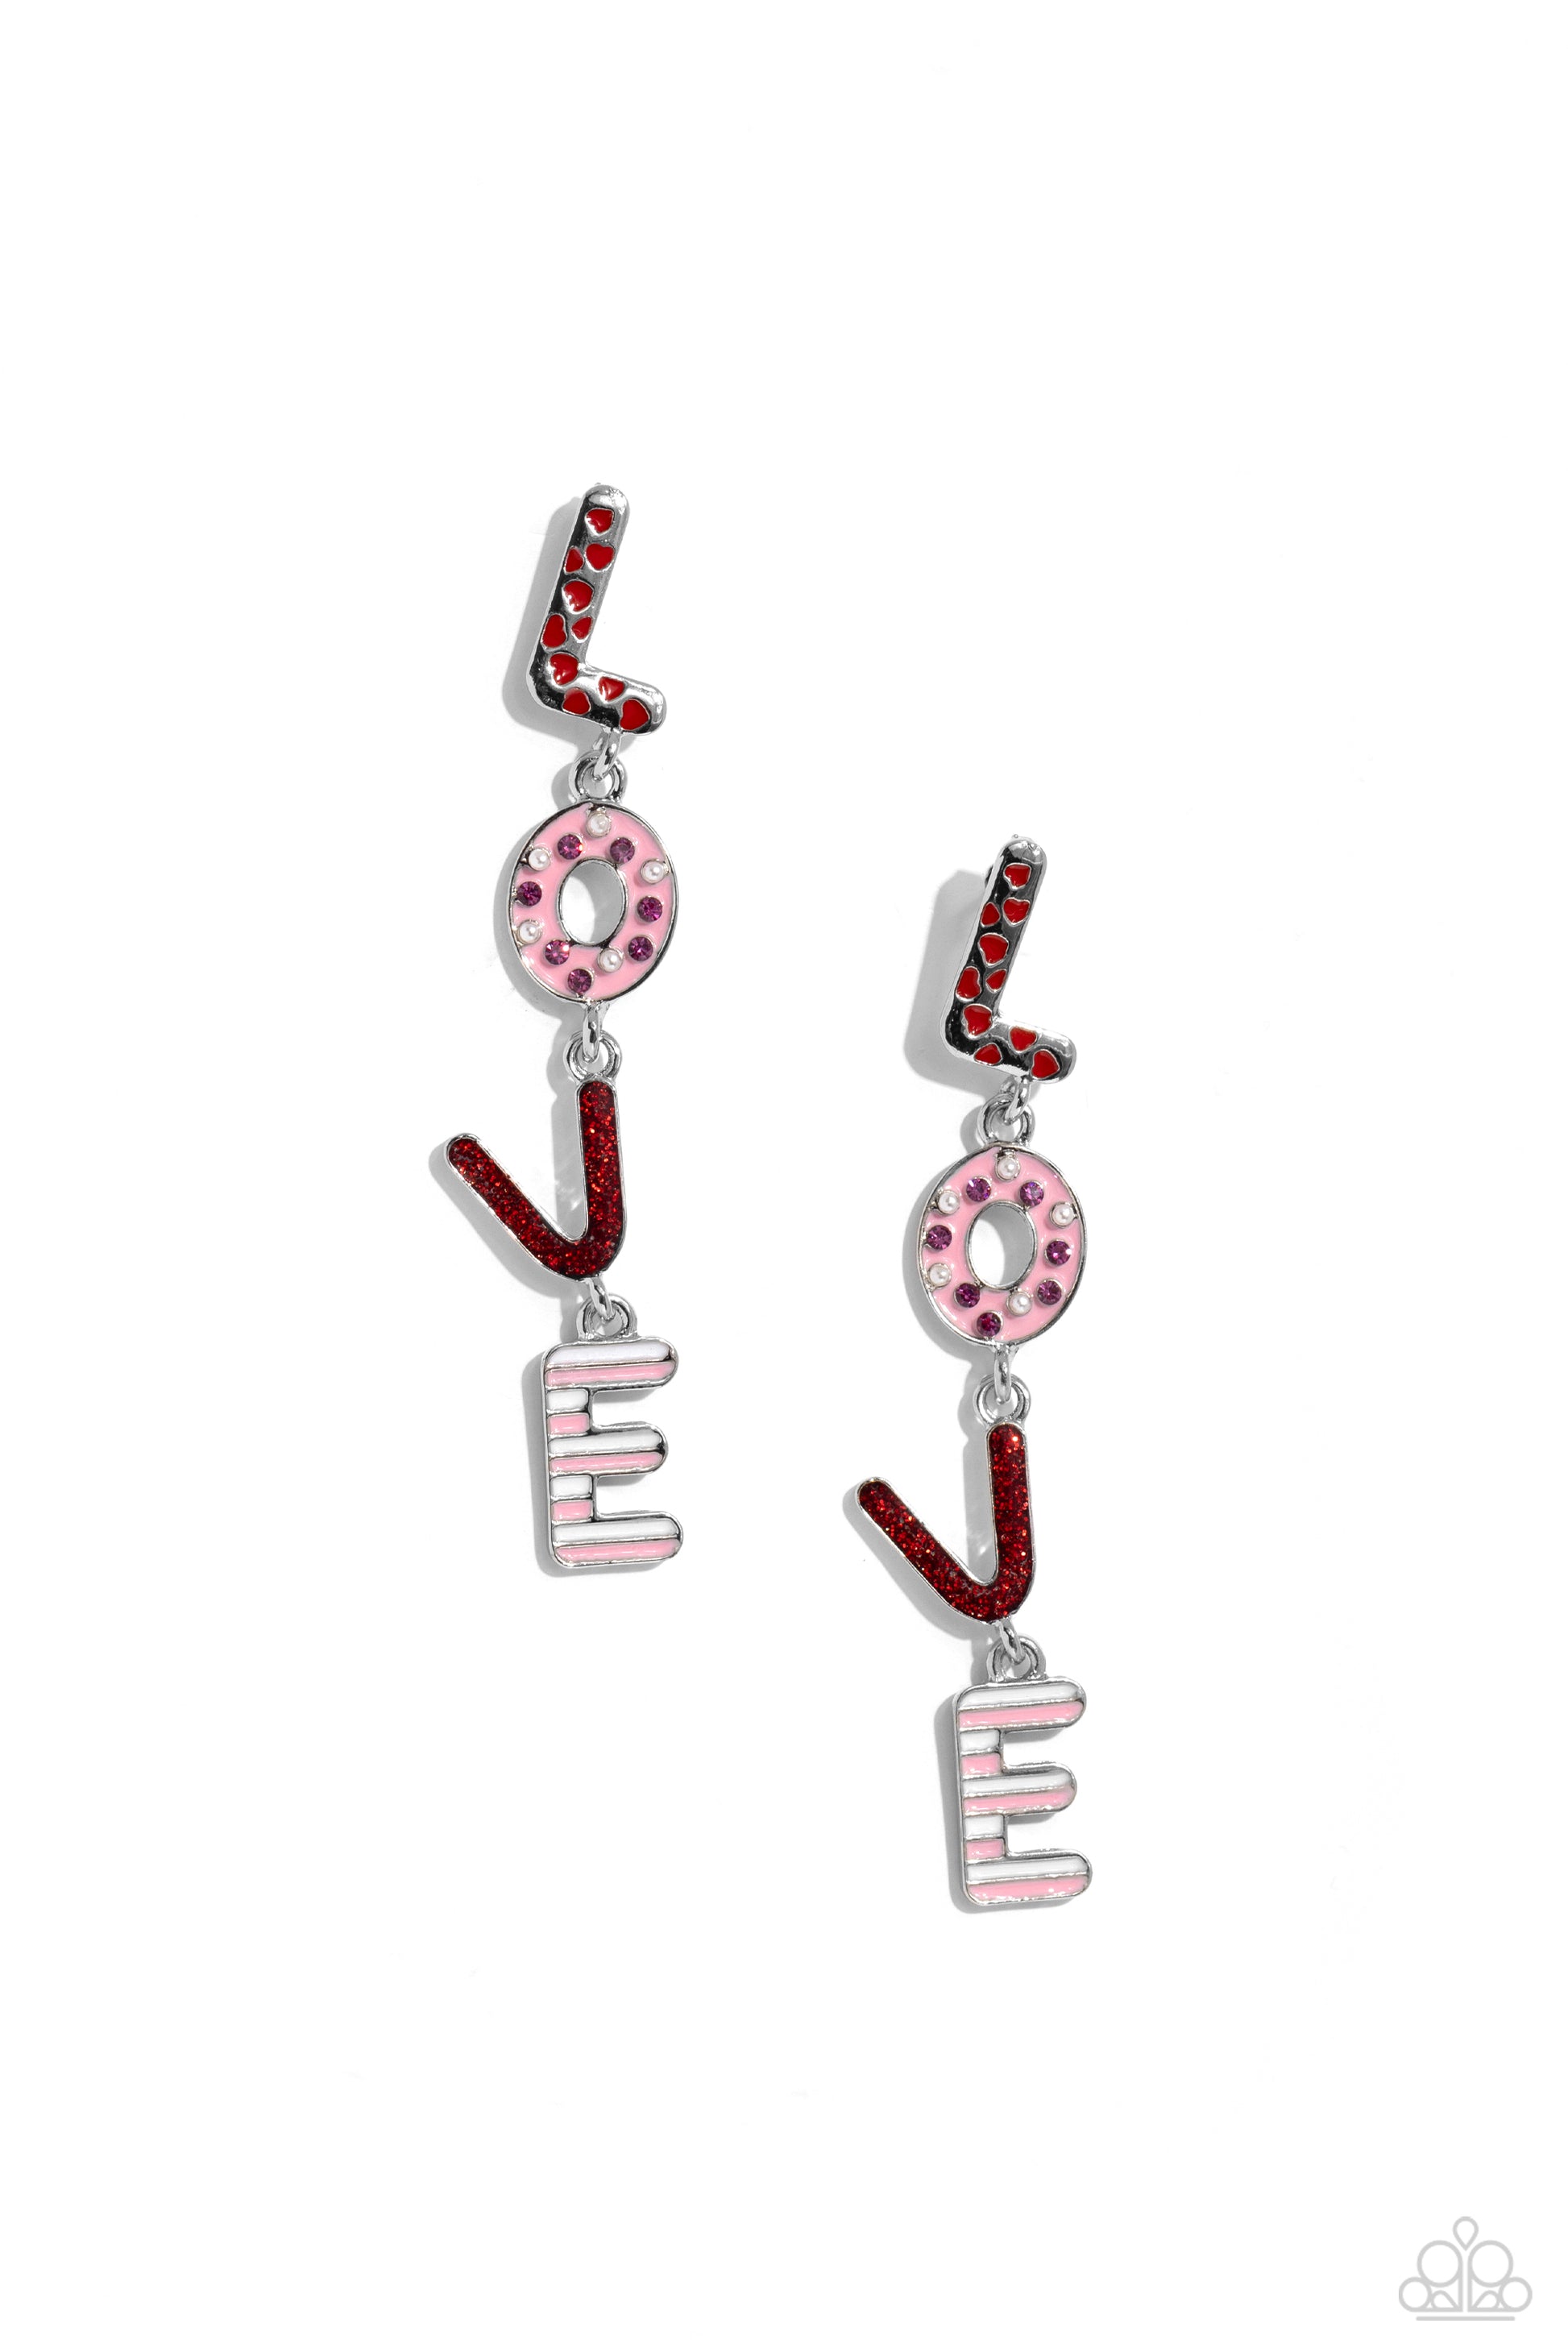 Admirable Assortment Red Love Post Earring - Paparazzi Accessories  Silver letters with various Valentine's-inspired details spell out the word "LOVE" as they vertically cascade down the ear in a flattering finish. The "L" features red-painted hearts, the "O" features a baby pink background with fuchsia rhinestones and dainty white pearls, the "V" features a red glitter backdrop, and the "E" features stripes of white and baby pink. 